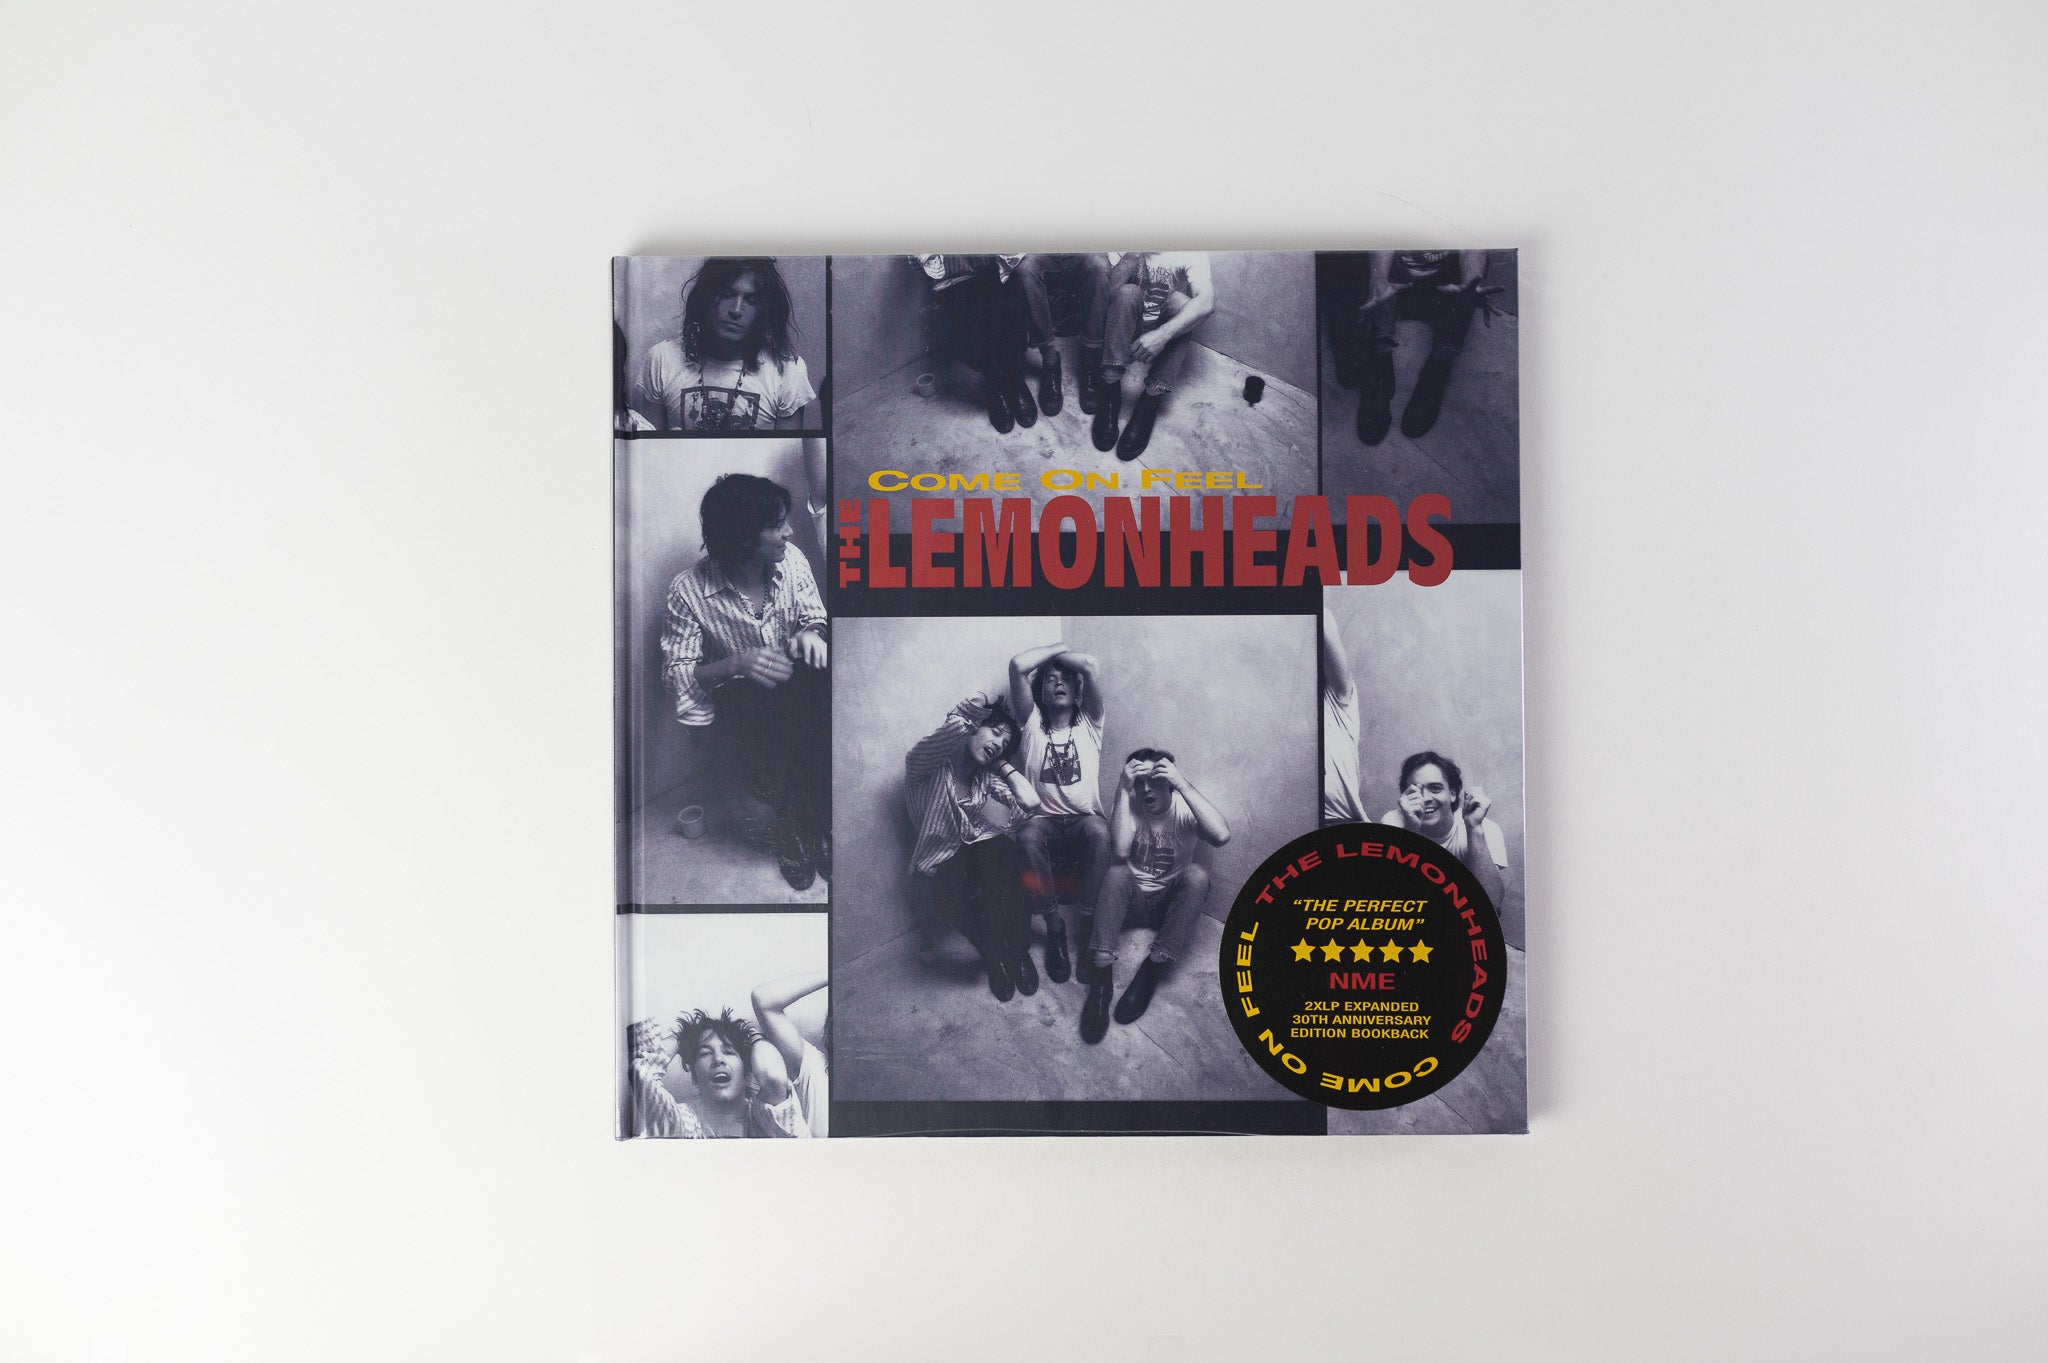 The Lemonheads - Come On Feel The Lemonheads on Fire Records Deluxe 30th Anniversary Bookback Compilation Sealed